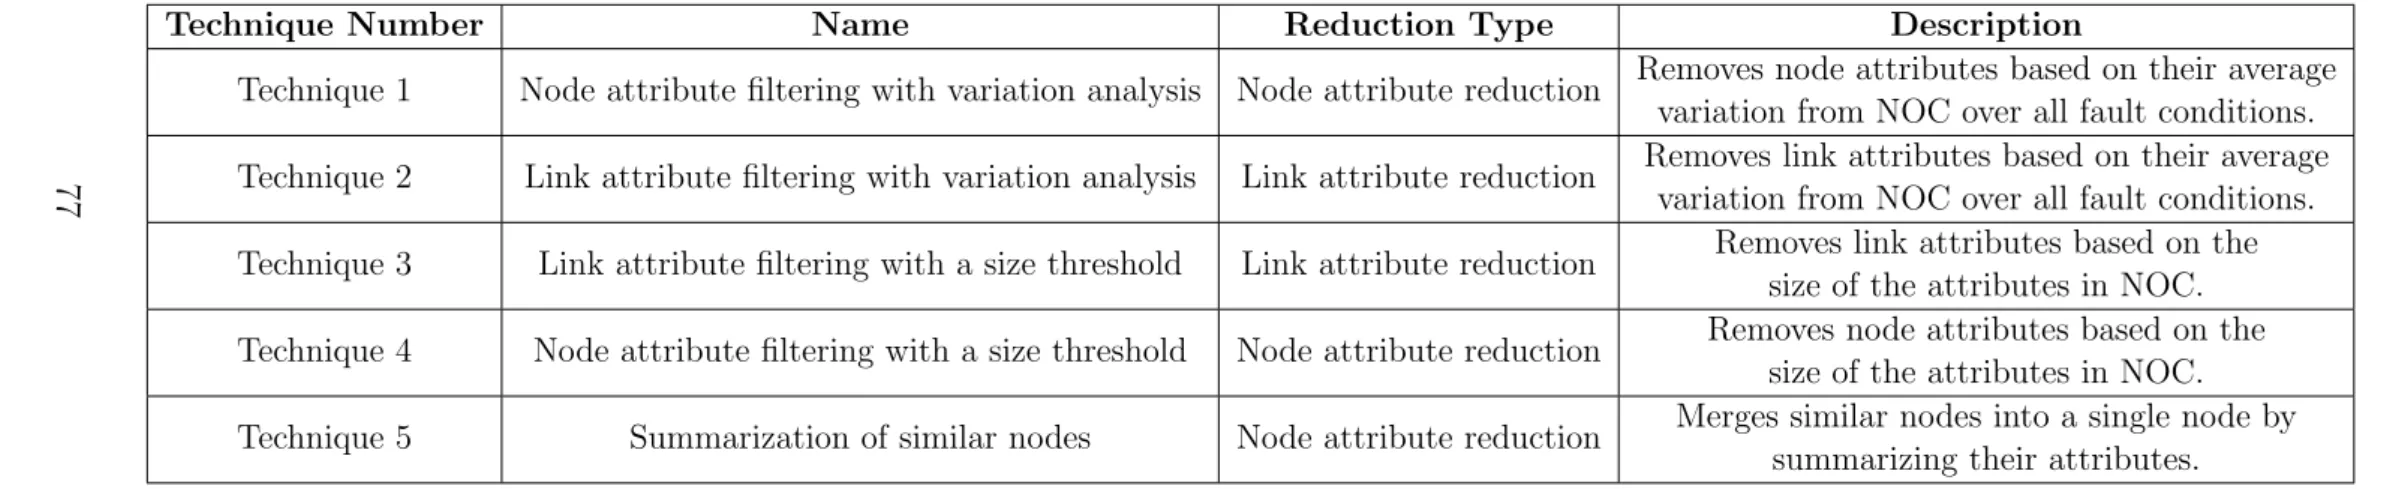 Table 5.1: Summary of the graph reduction techniques proposed in this study.